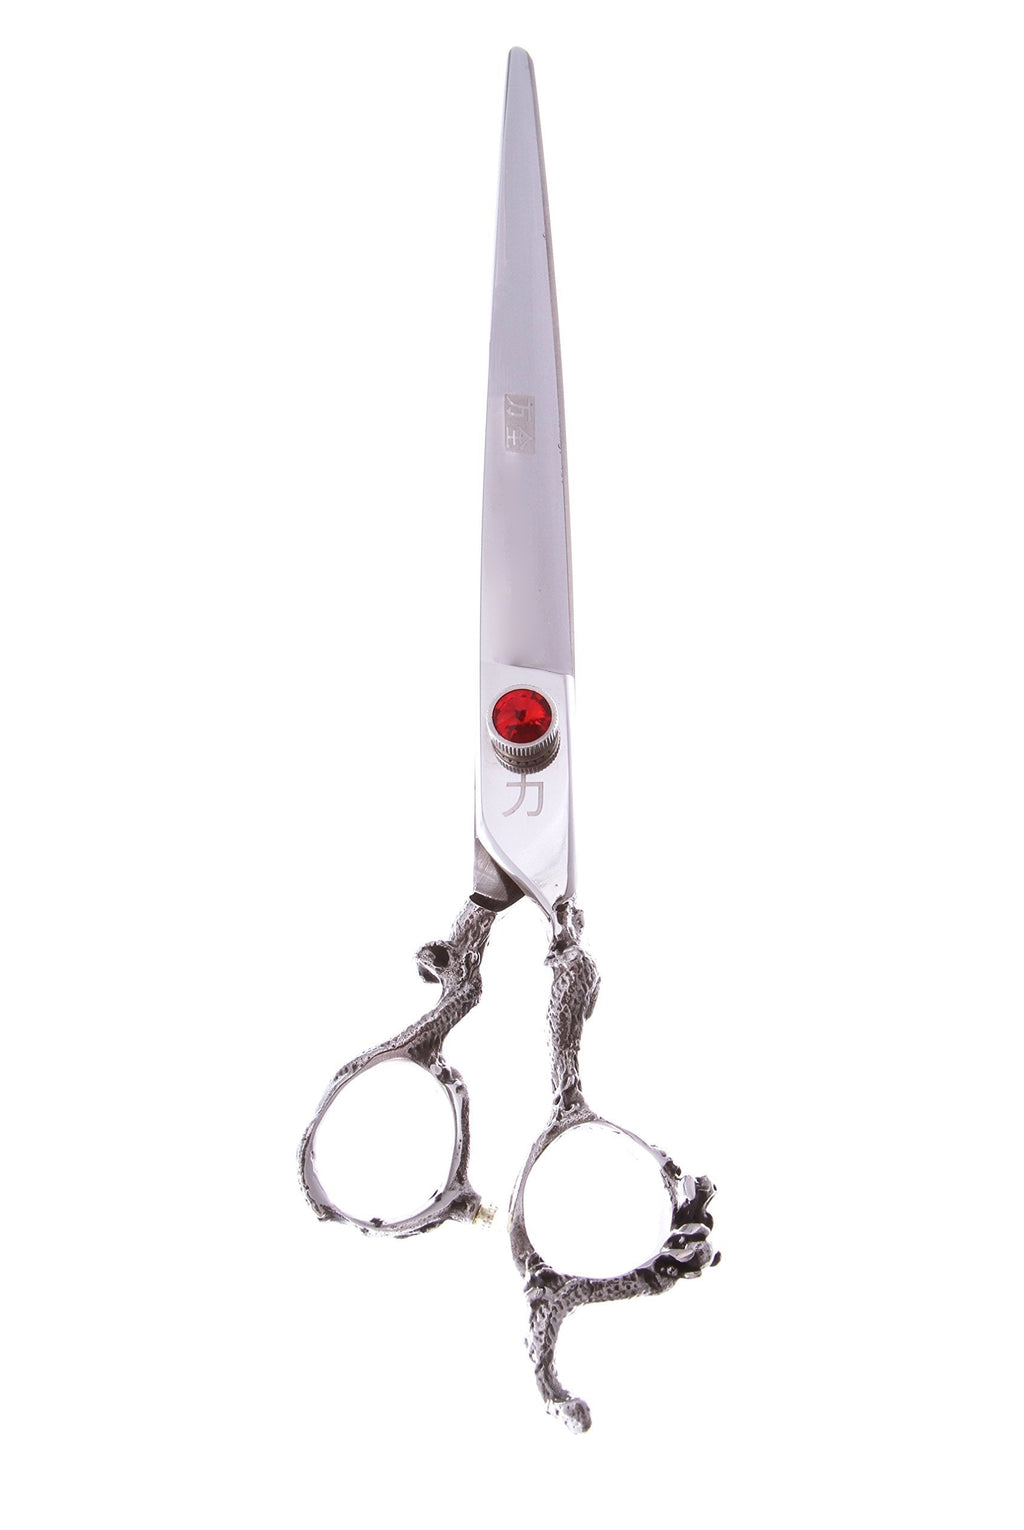 [Australia] - ShearsDirect Japanese 440C Stainless Steel Straight Shear with Dragon Handle, 9.0" 